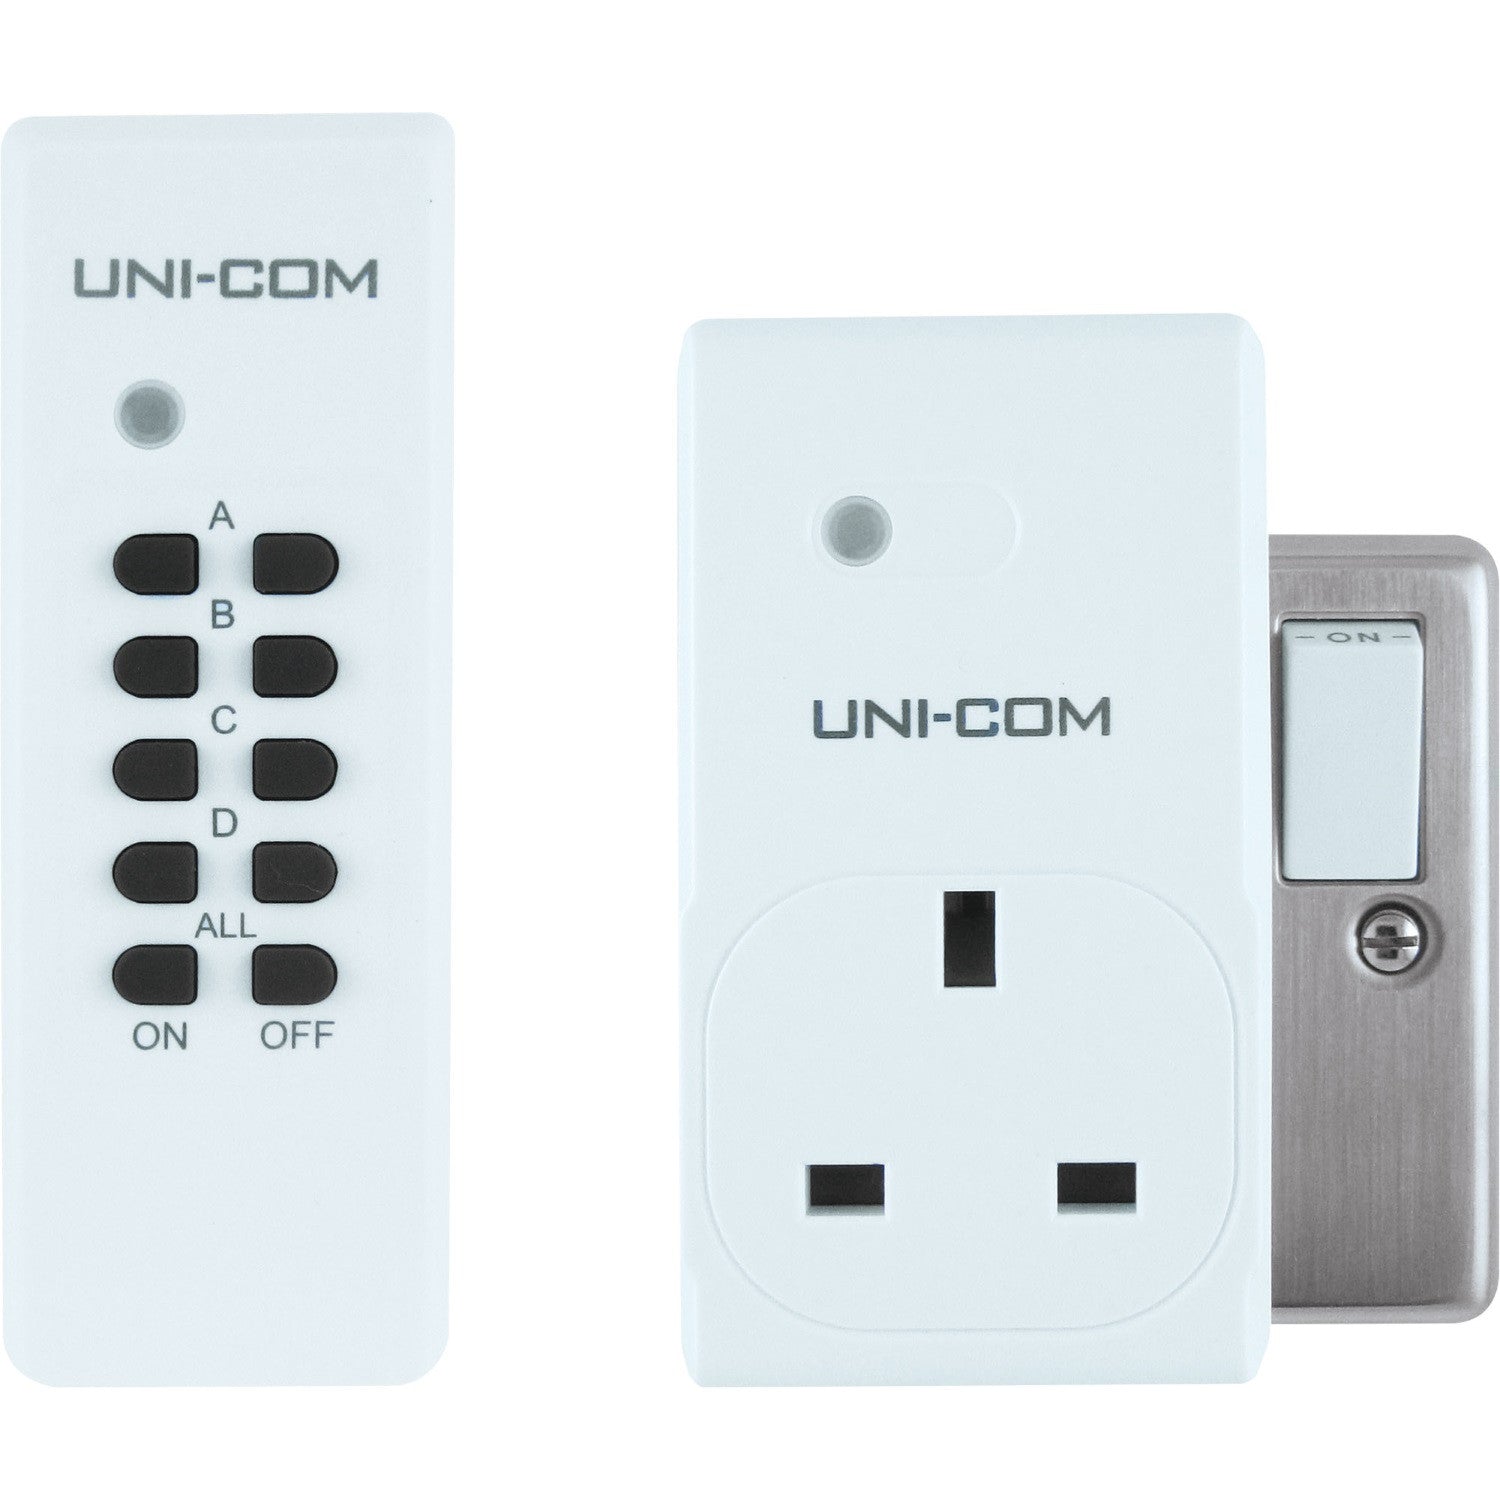 Remote Control Outlets – BESTTEN US